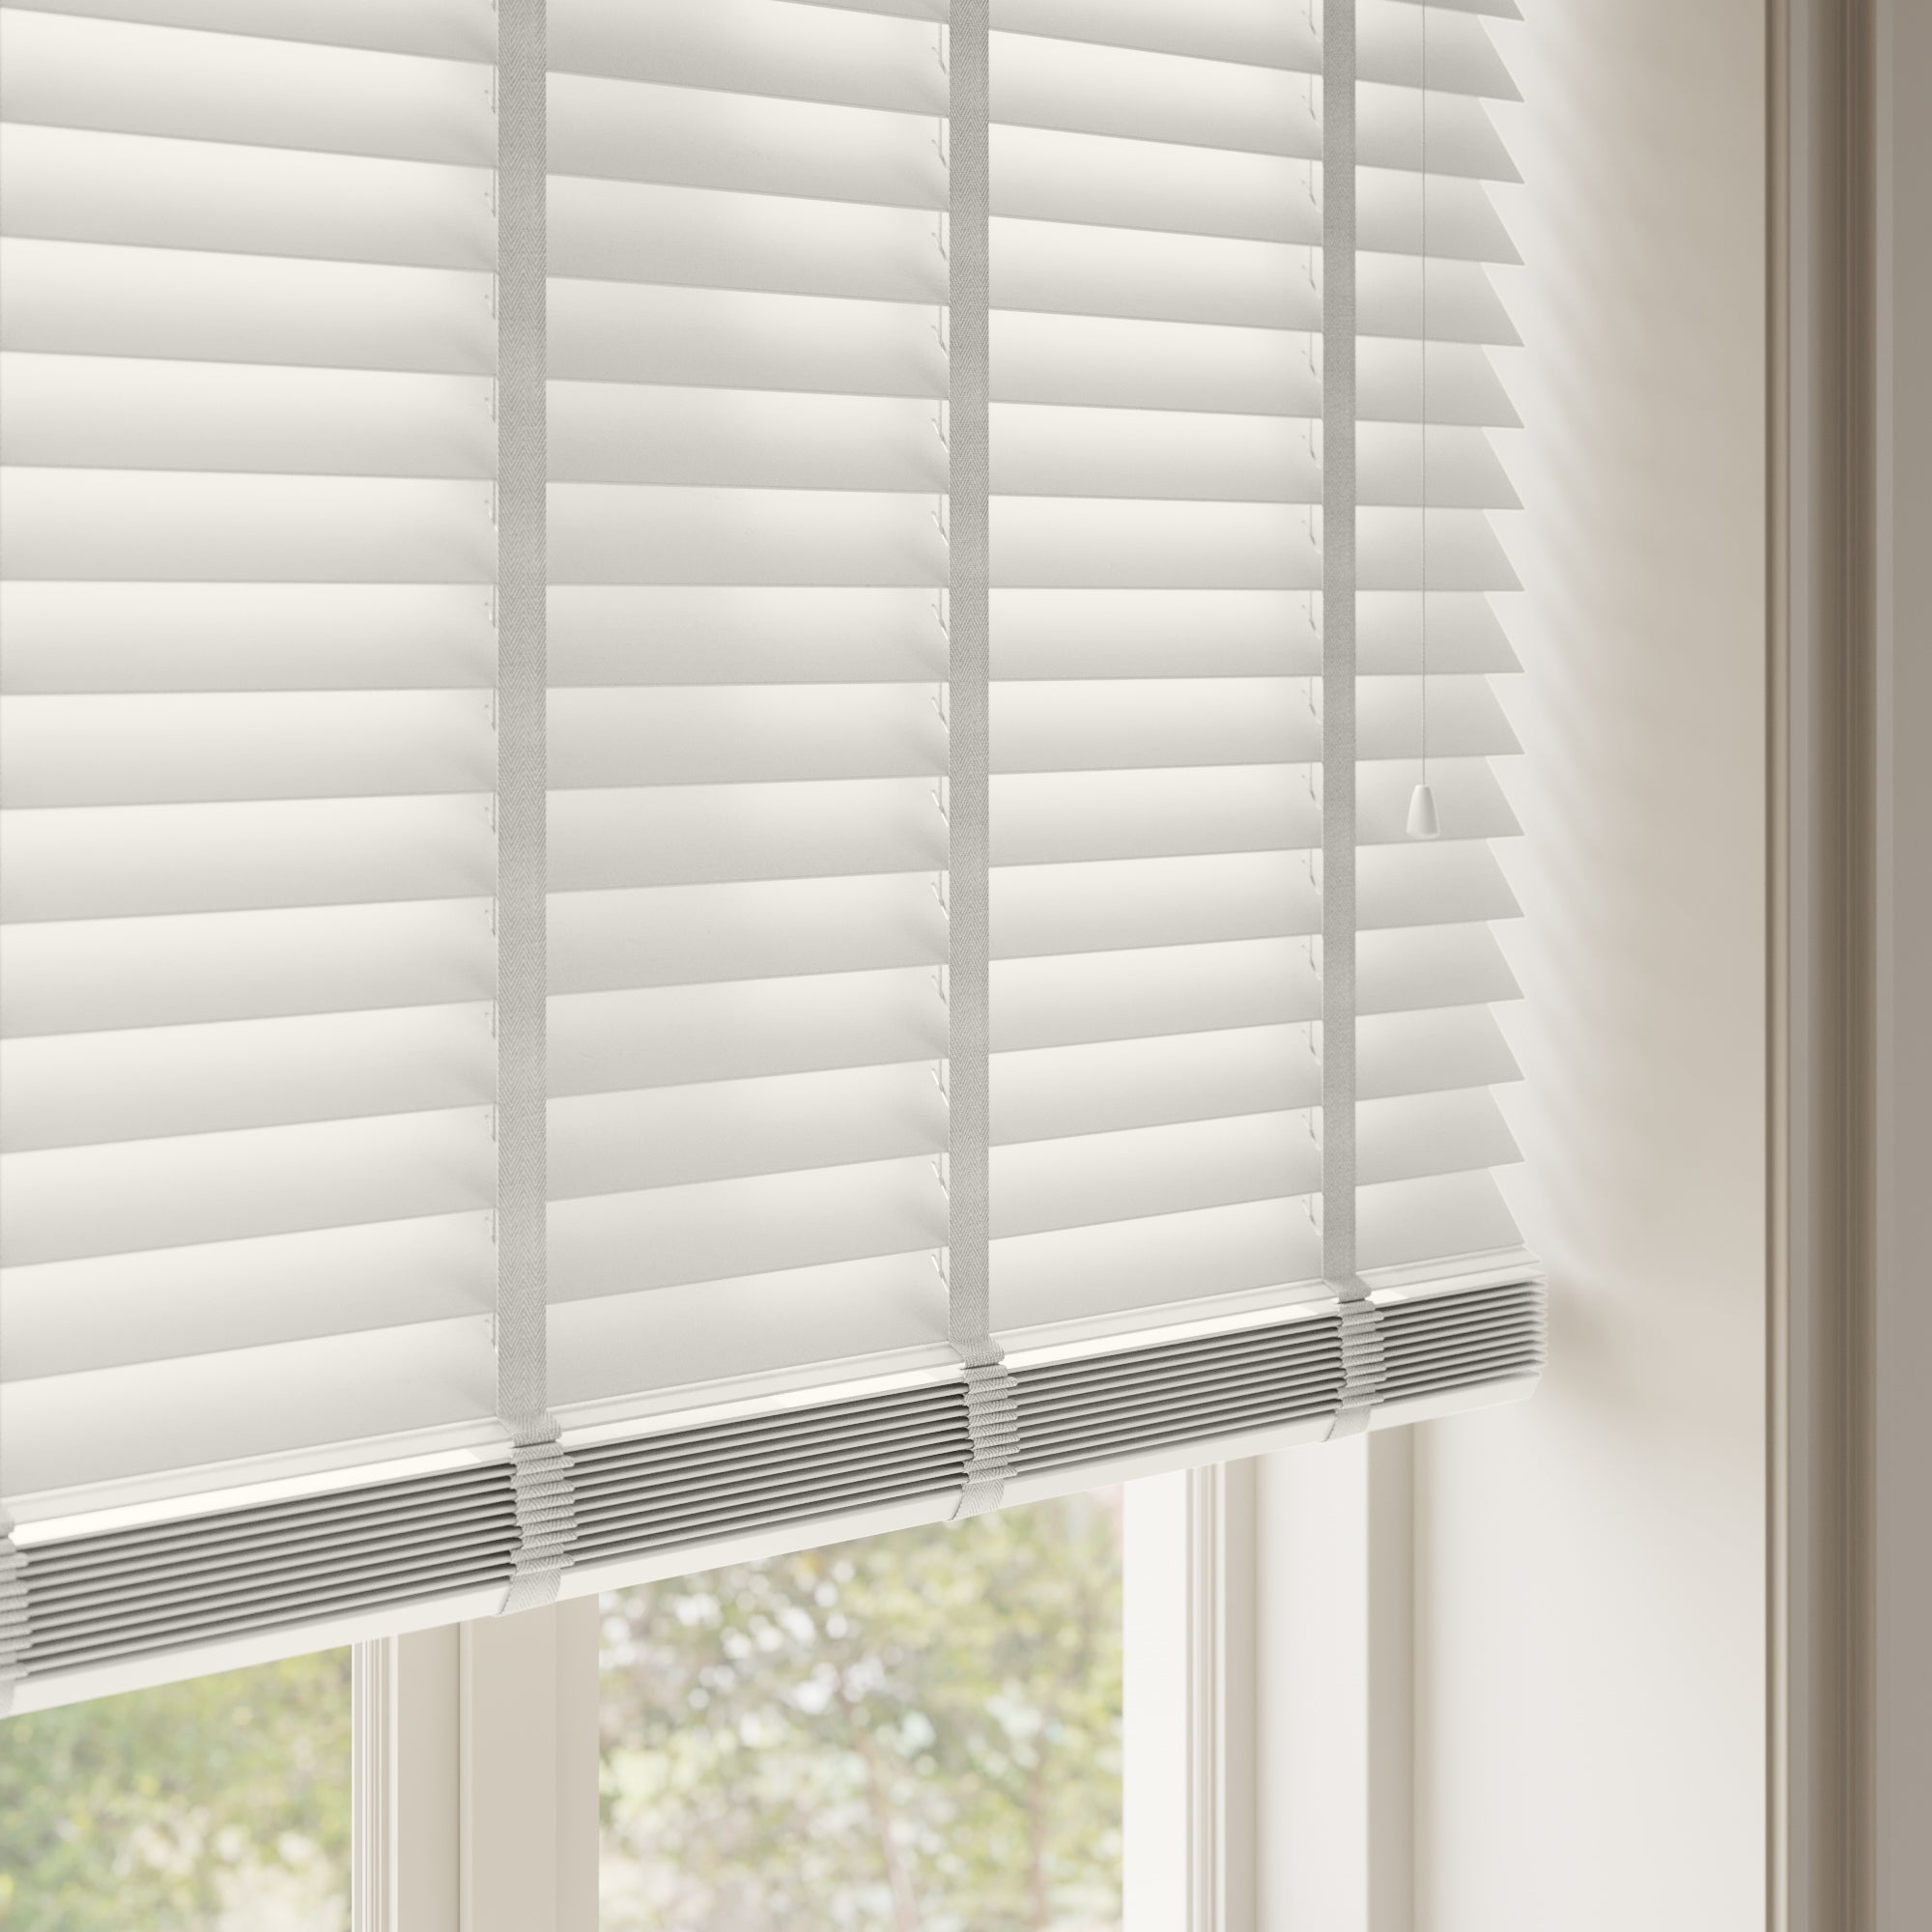 Made To Measure 63mm Slats White Textured Taped Venetian Blind Textured White